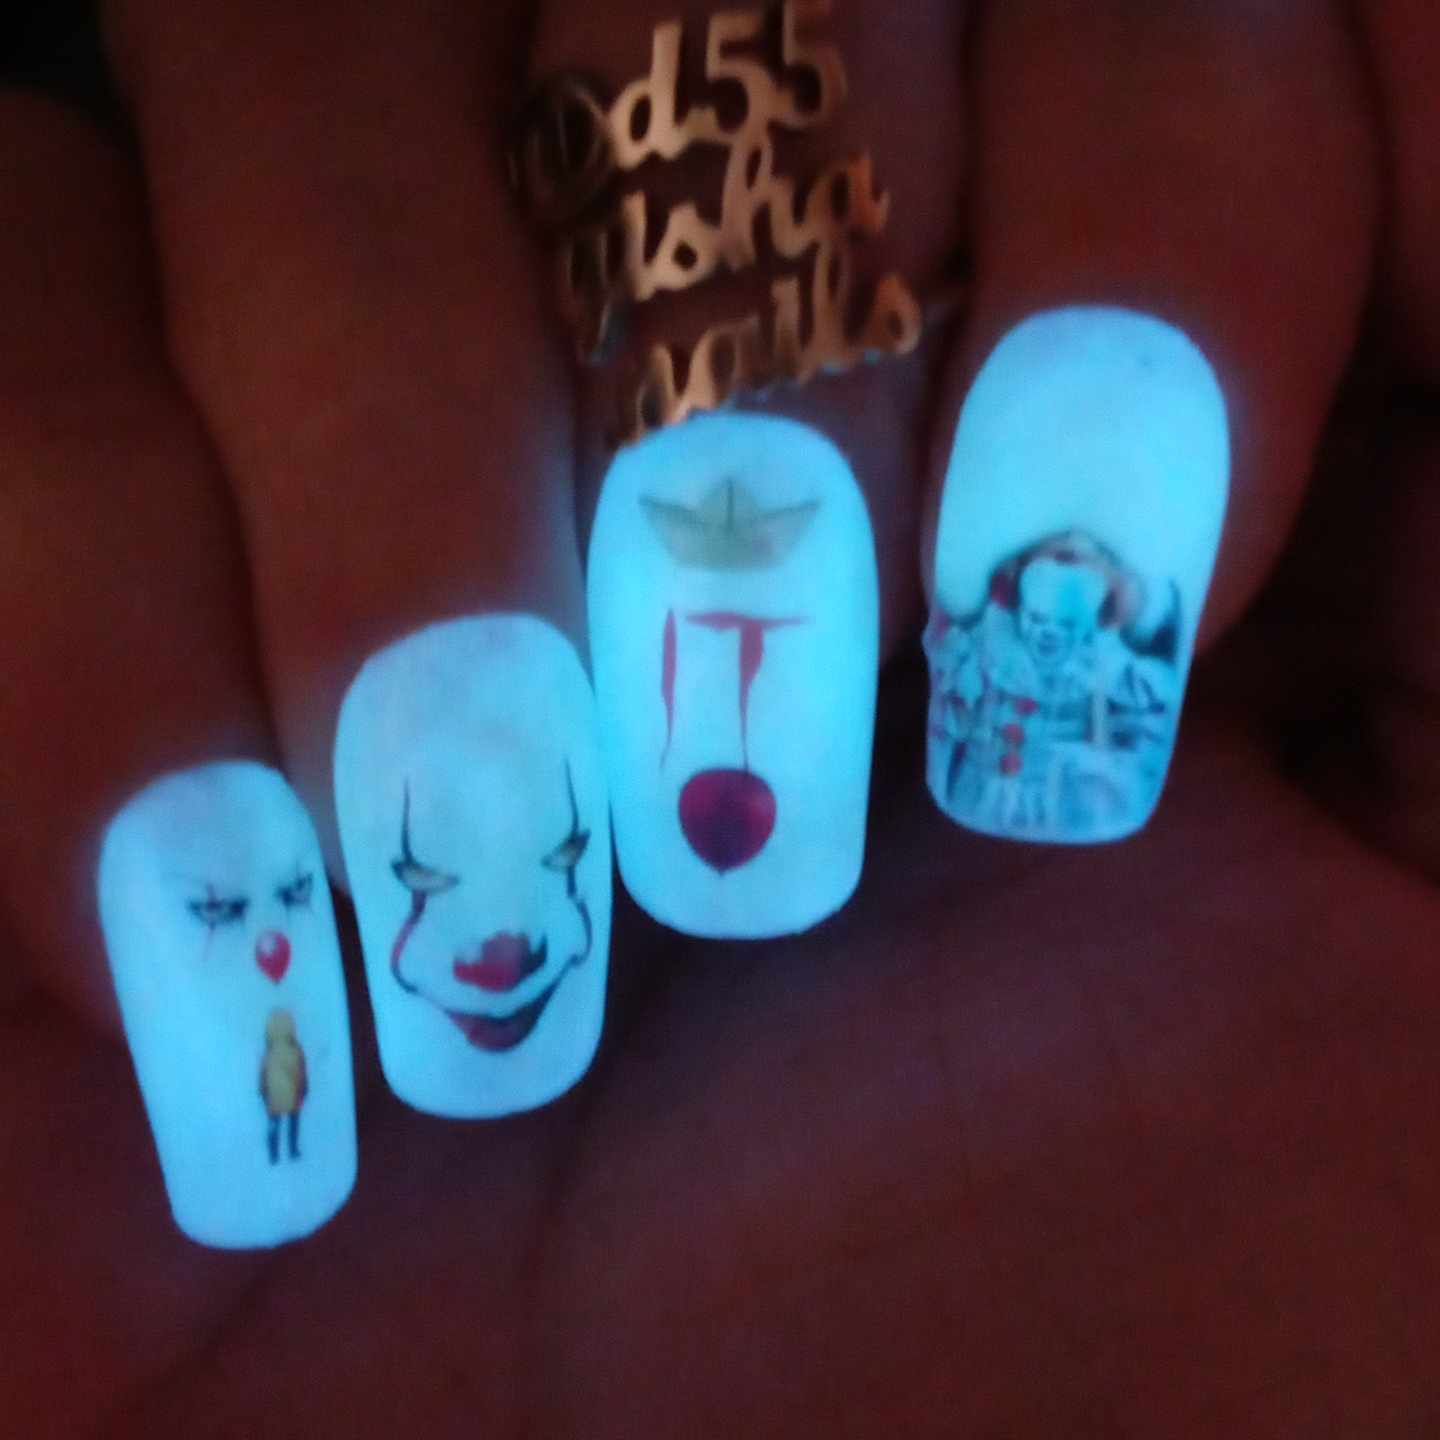 Halloween Horror Decals For Nails- Time to float